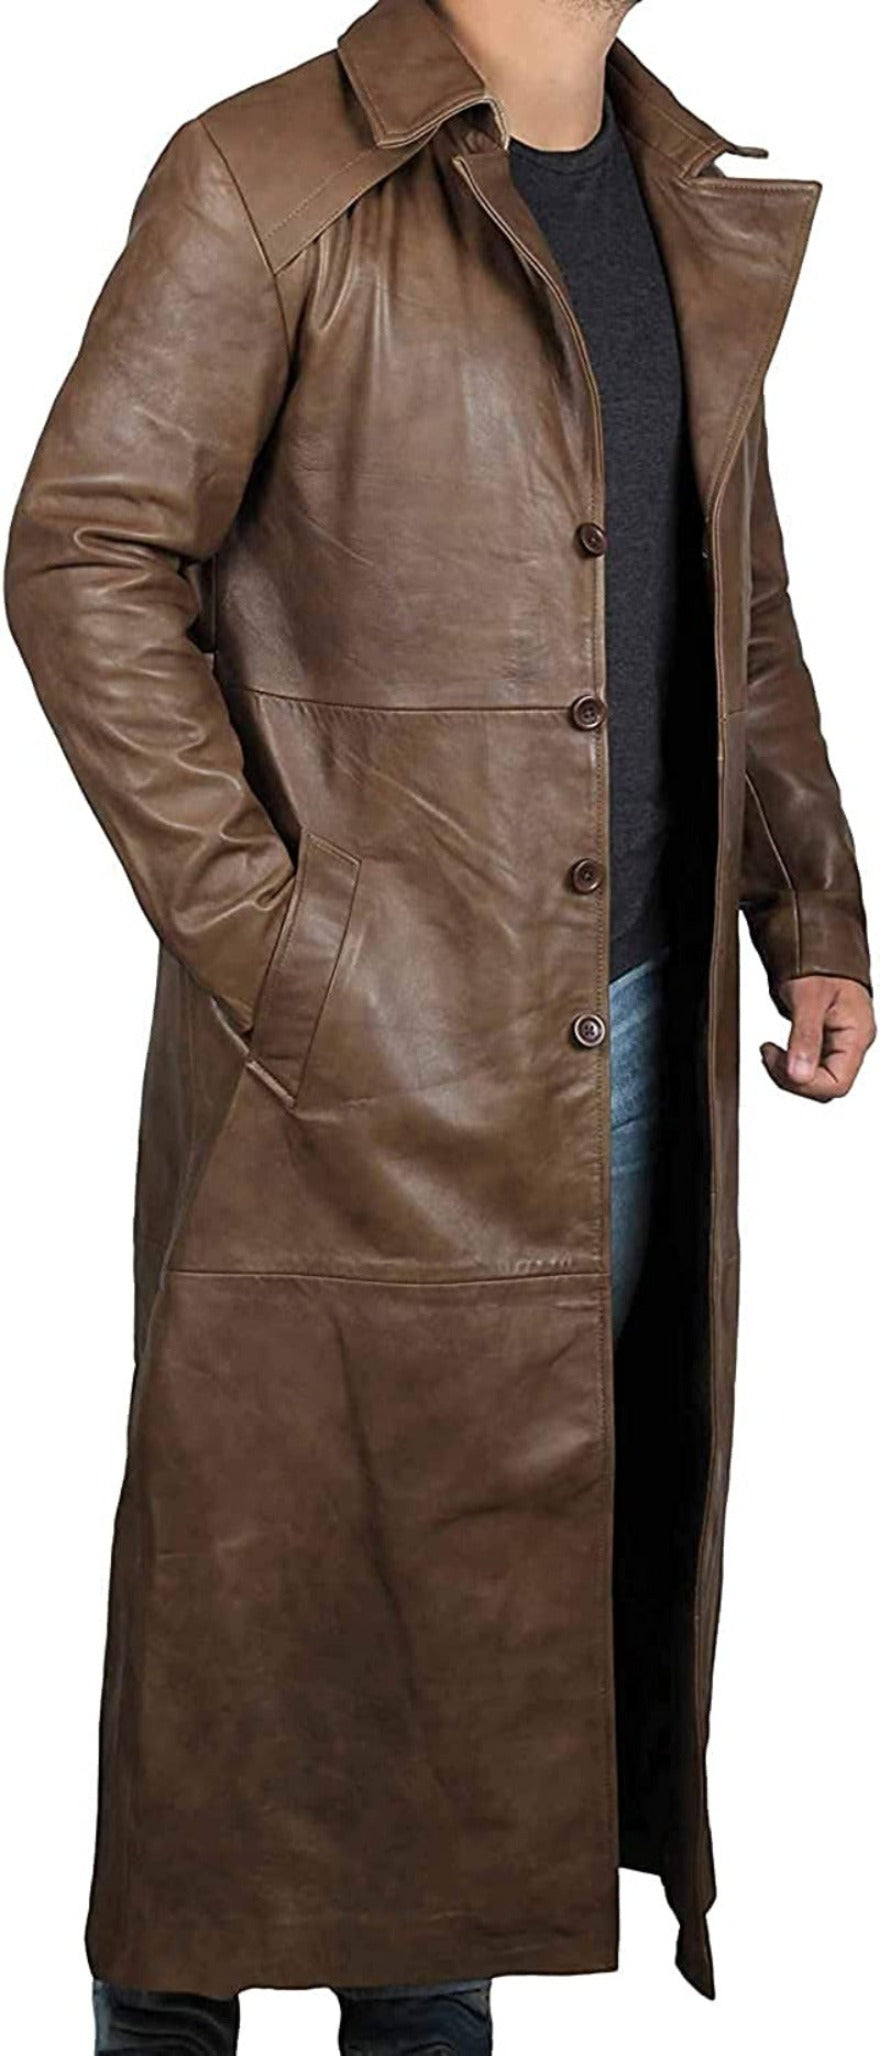 Picture of a model wearing our mens leather trench coat full length . Light brown  color, side view unbuttoned.